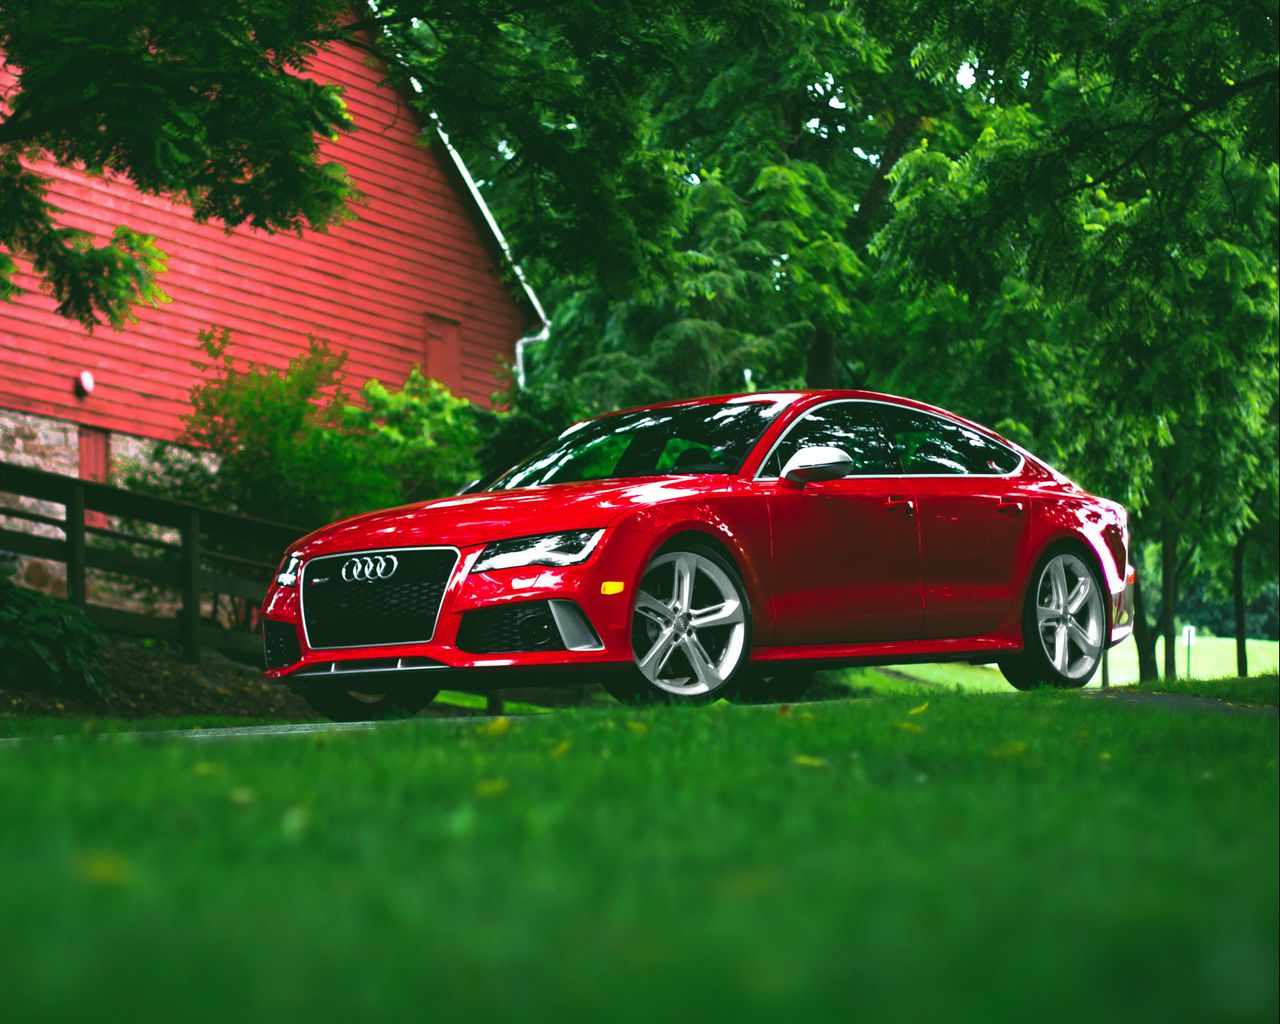 Download wallpaper 1280x1024 audi, rs7, red, grass, side view standard 5:4  hd background